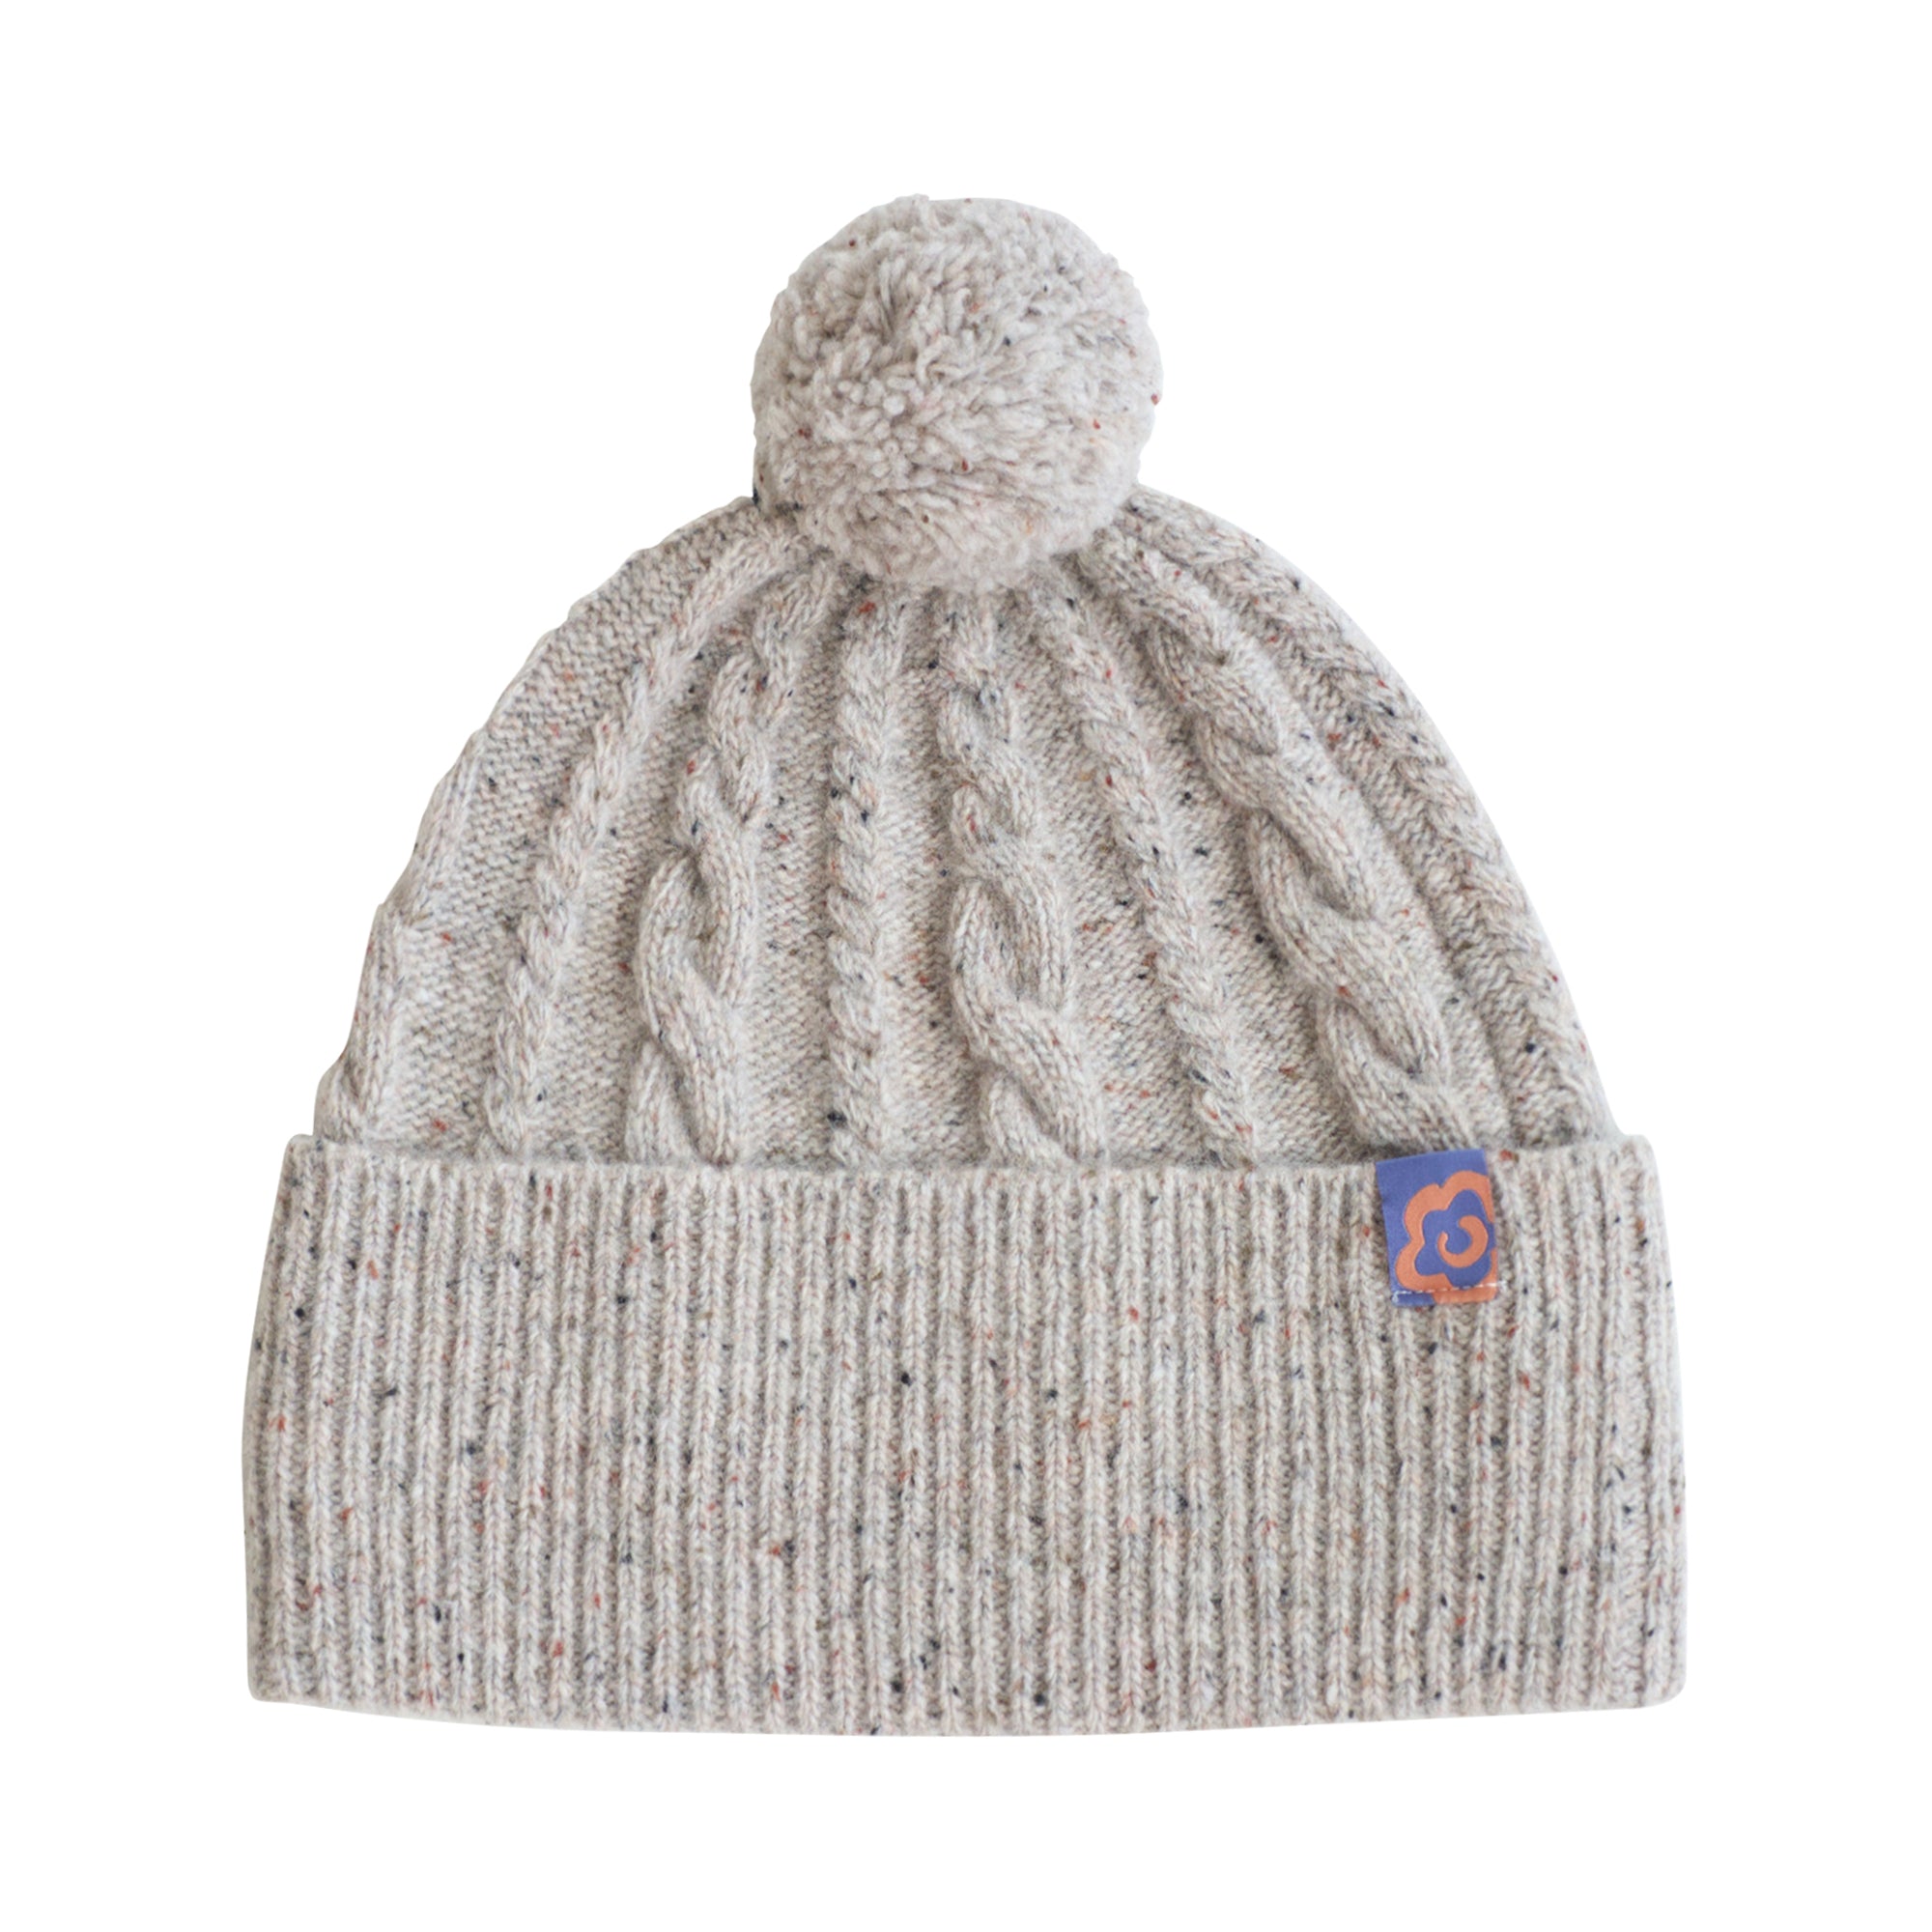 "Pom Pom" Cable Knit Wool Beanie - Silver Grey product